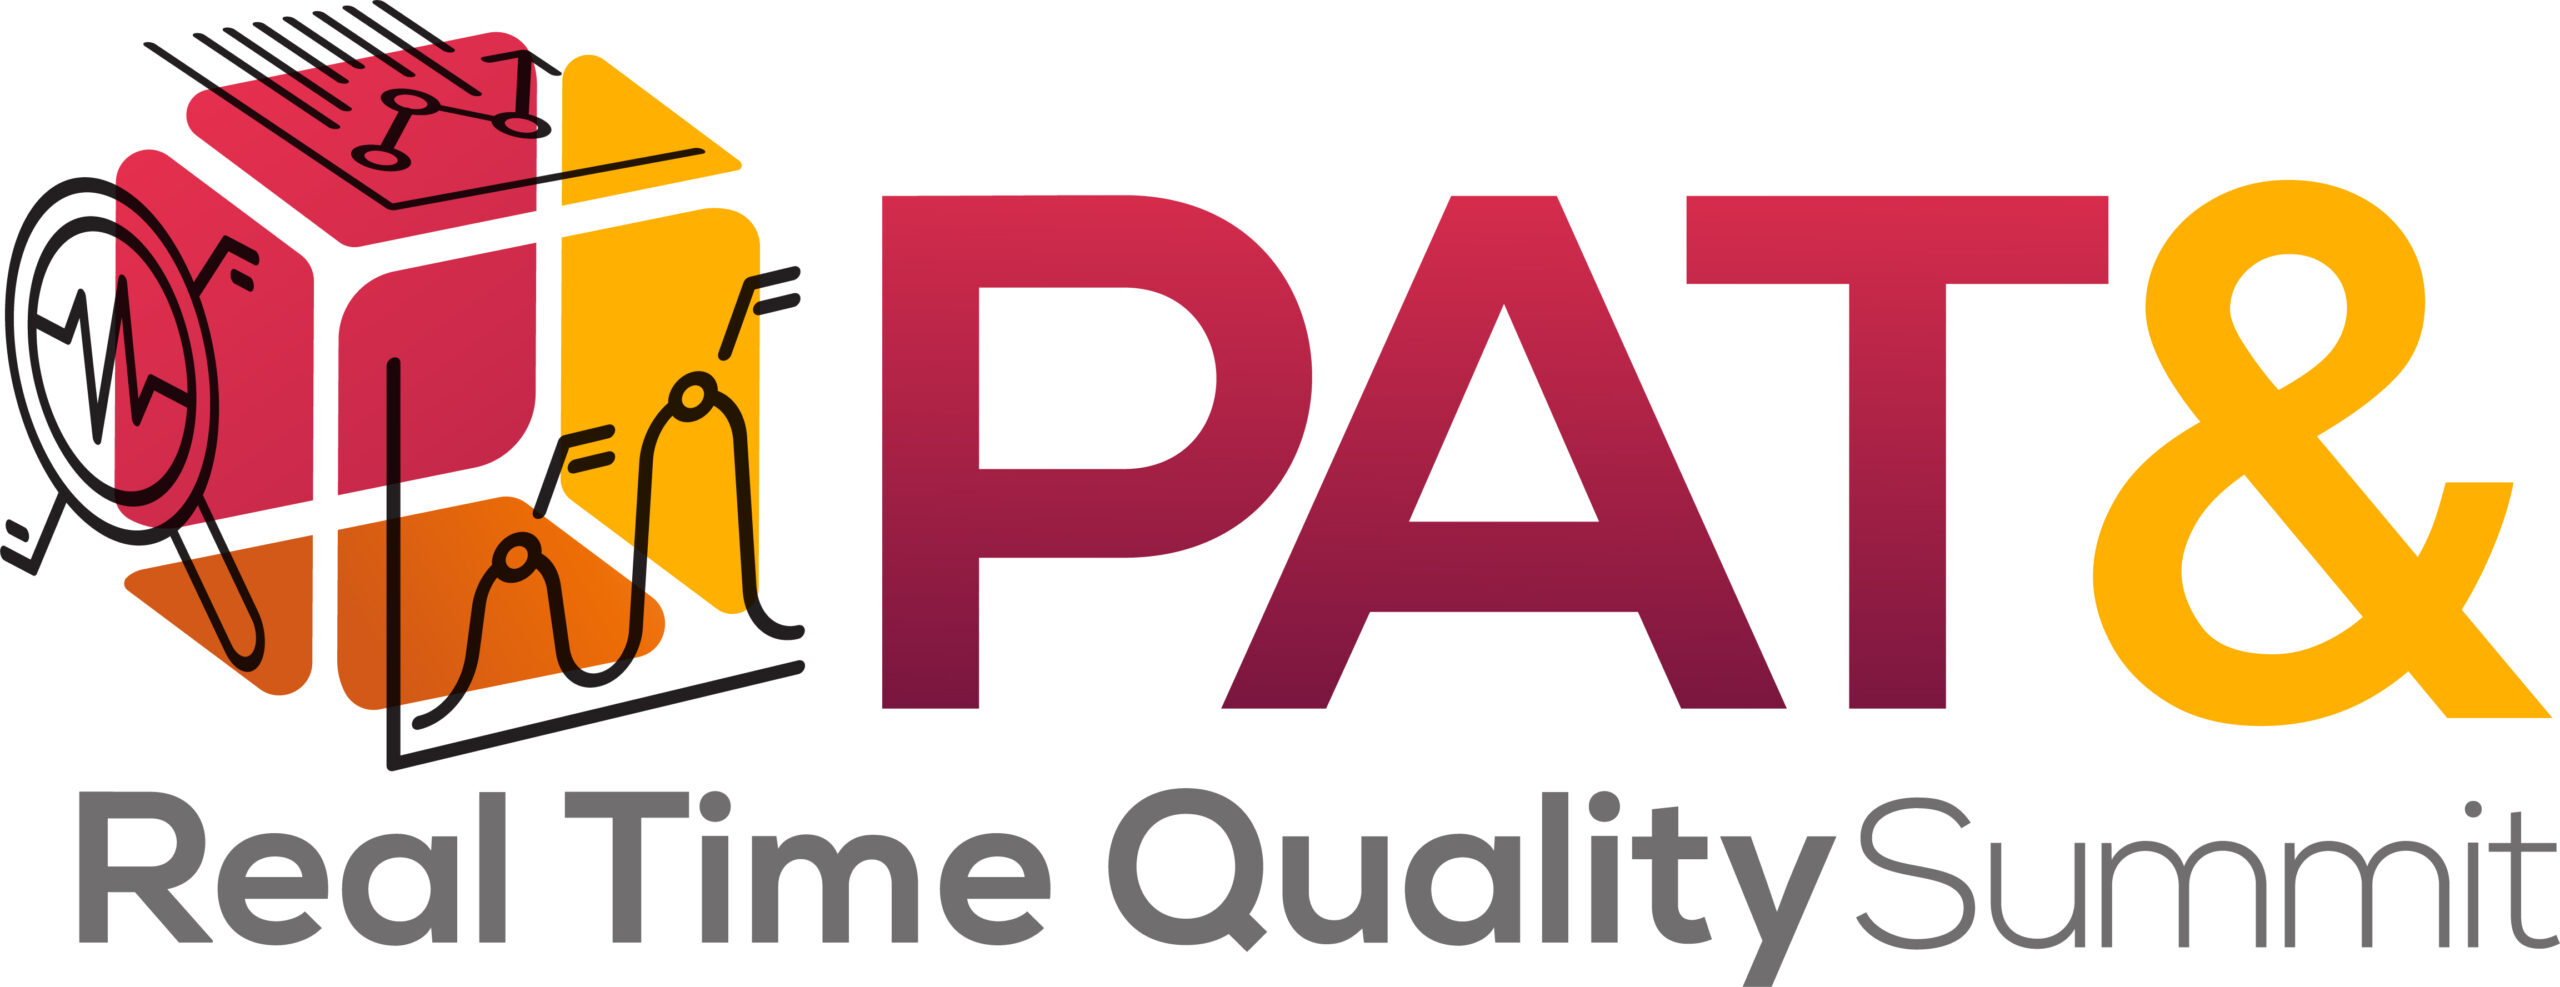 HW220623 PAT & Real Time Quality Summit logo FINAL